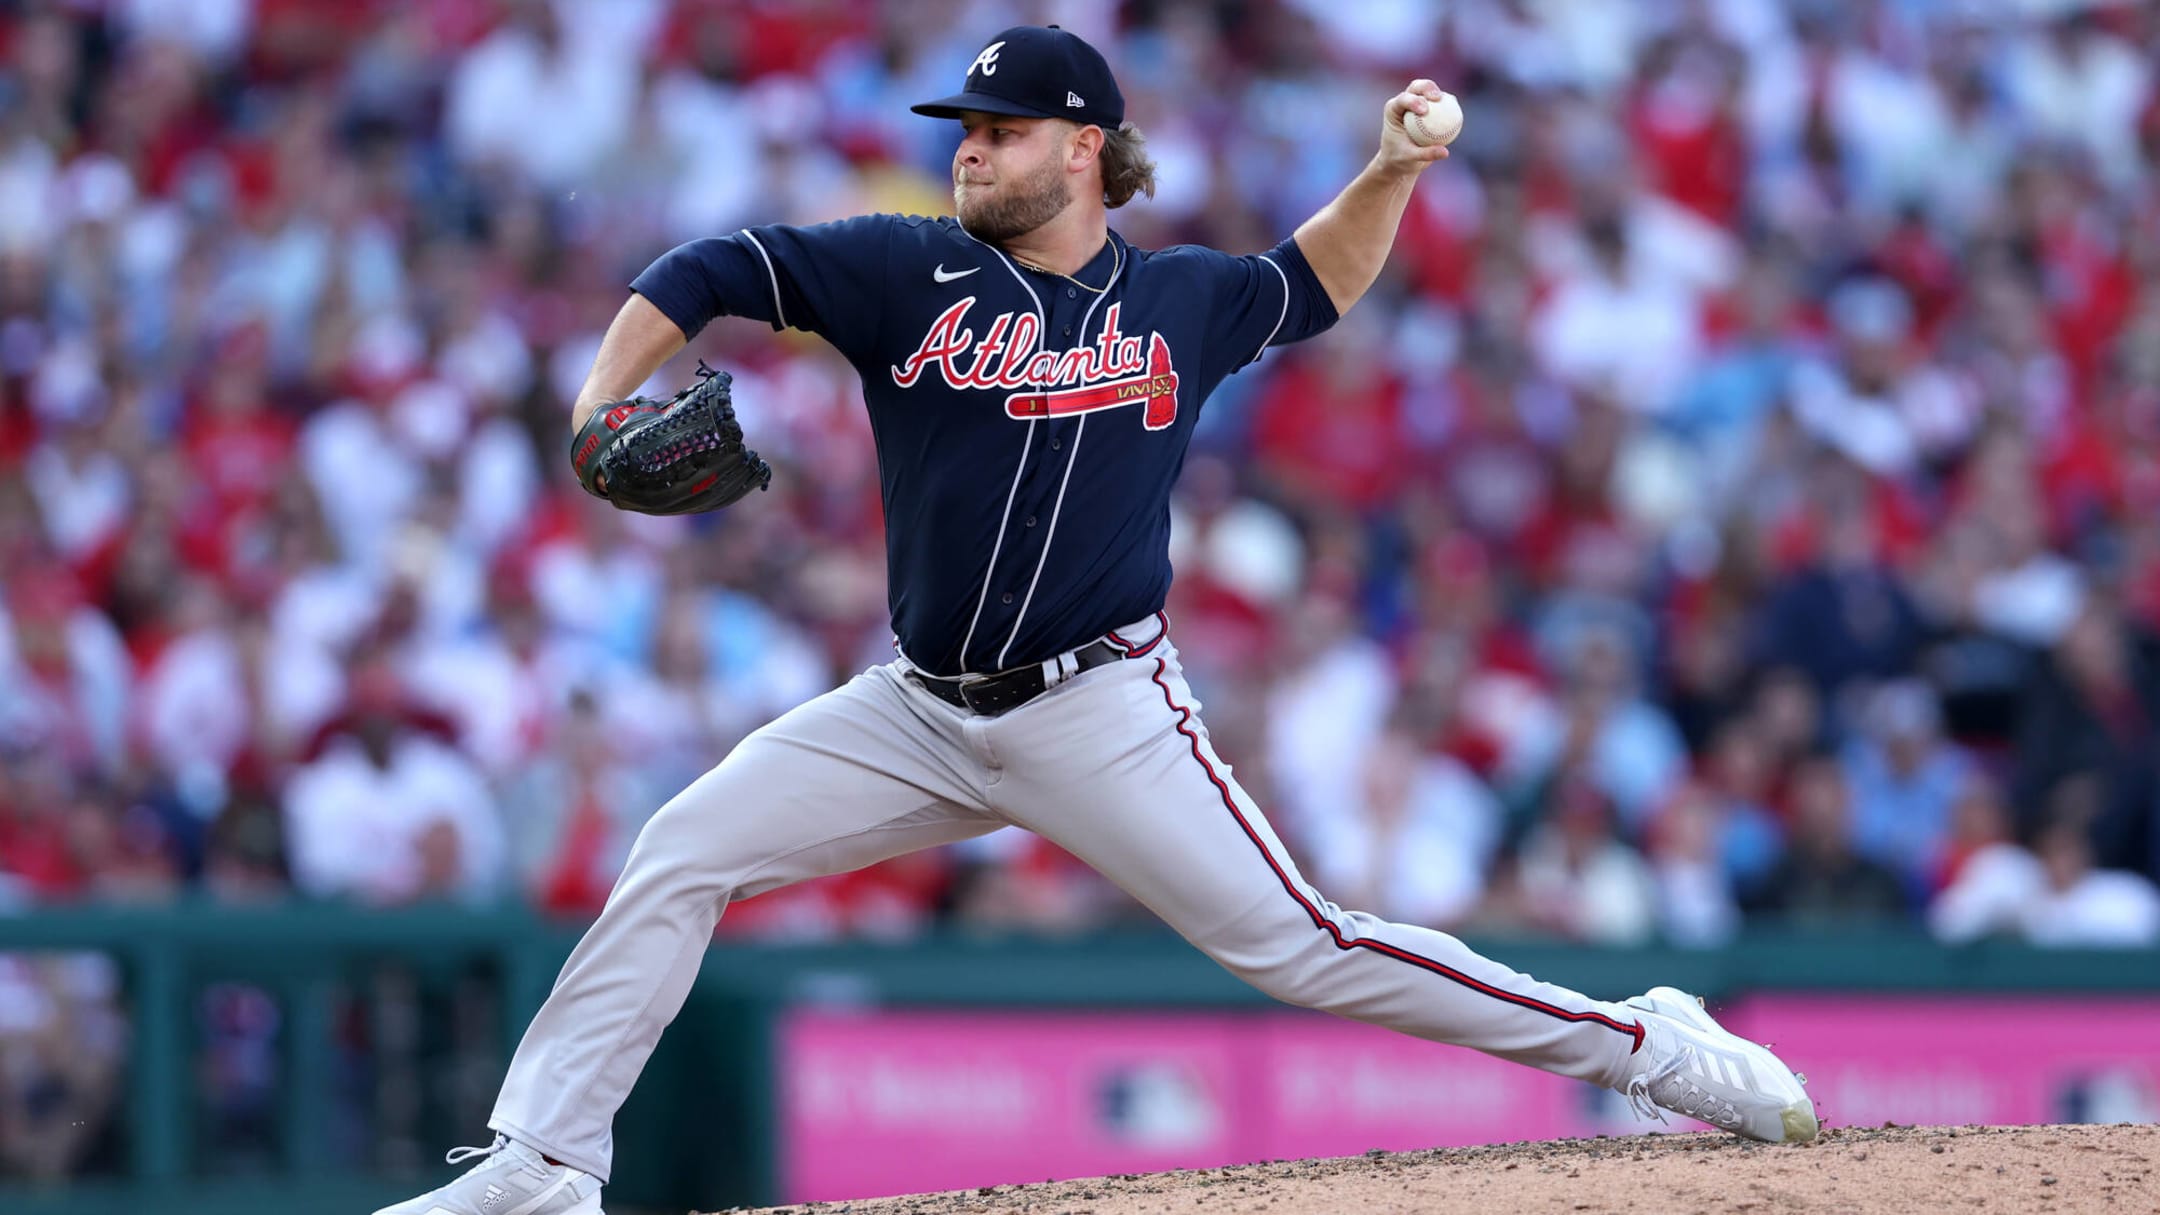 Top 10 Right Now - Relief Pitchers, relief pitcher